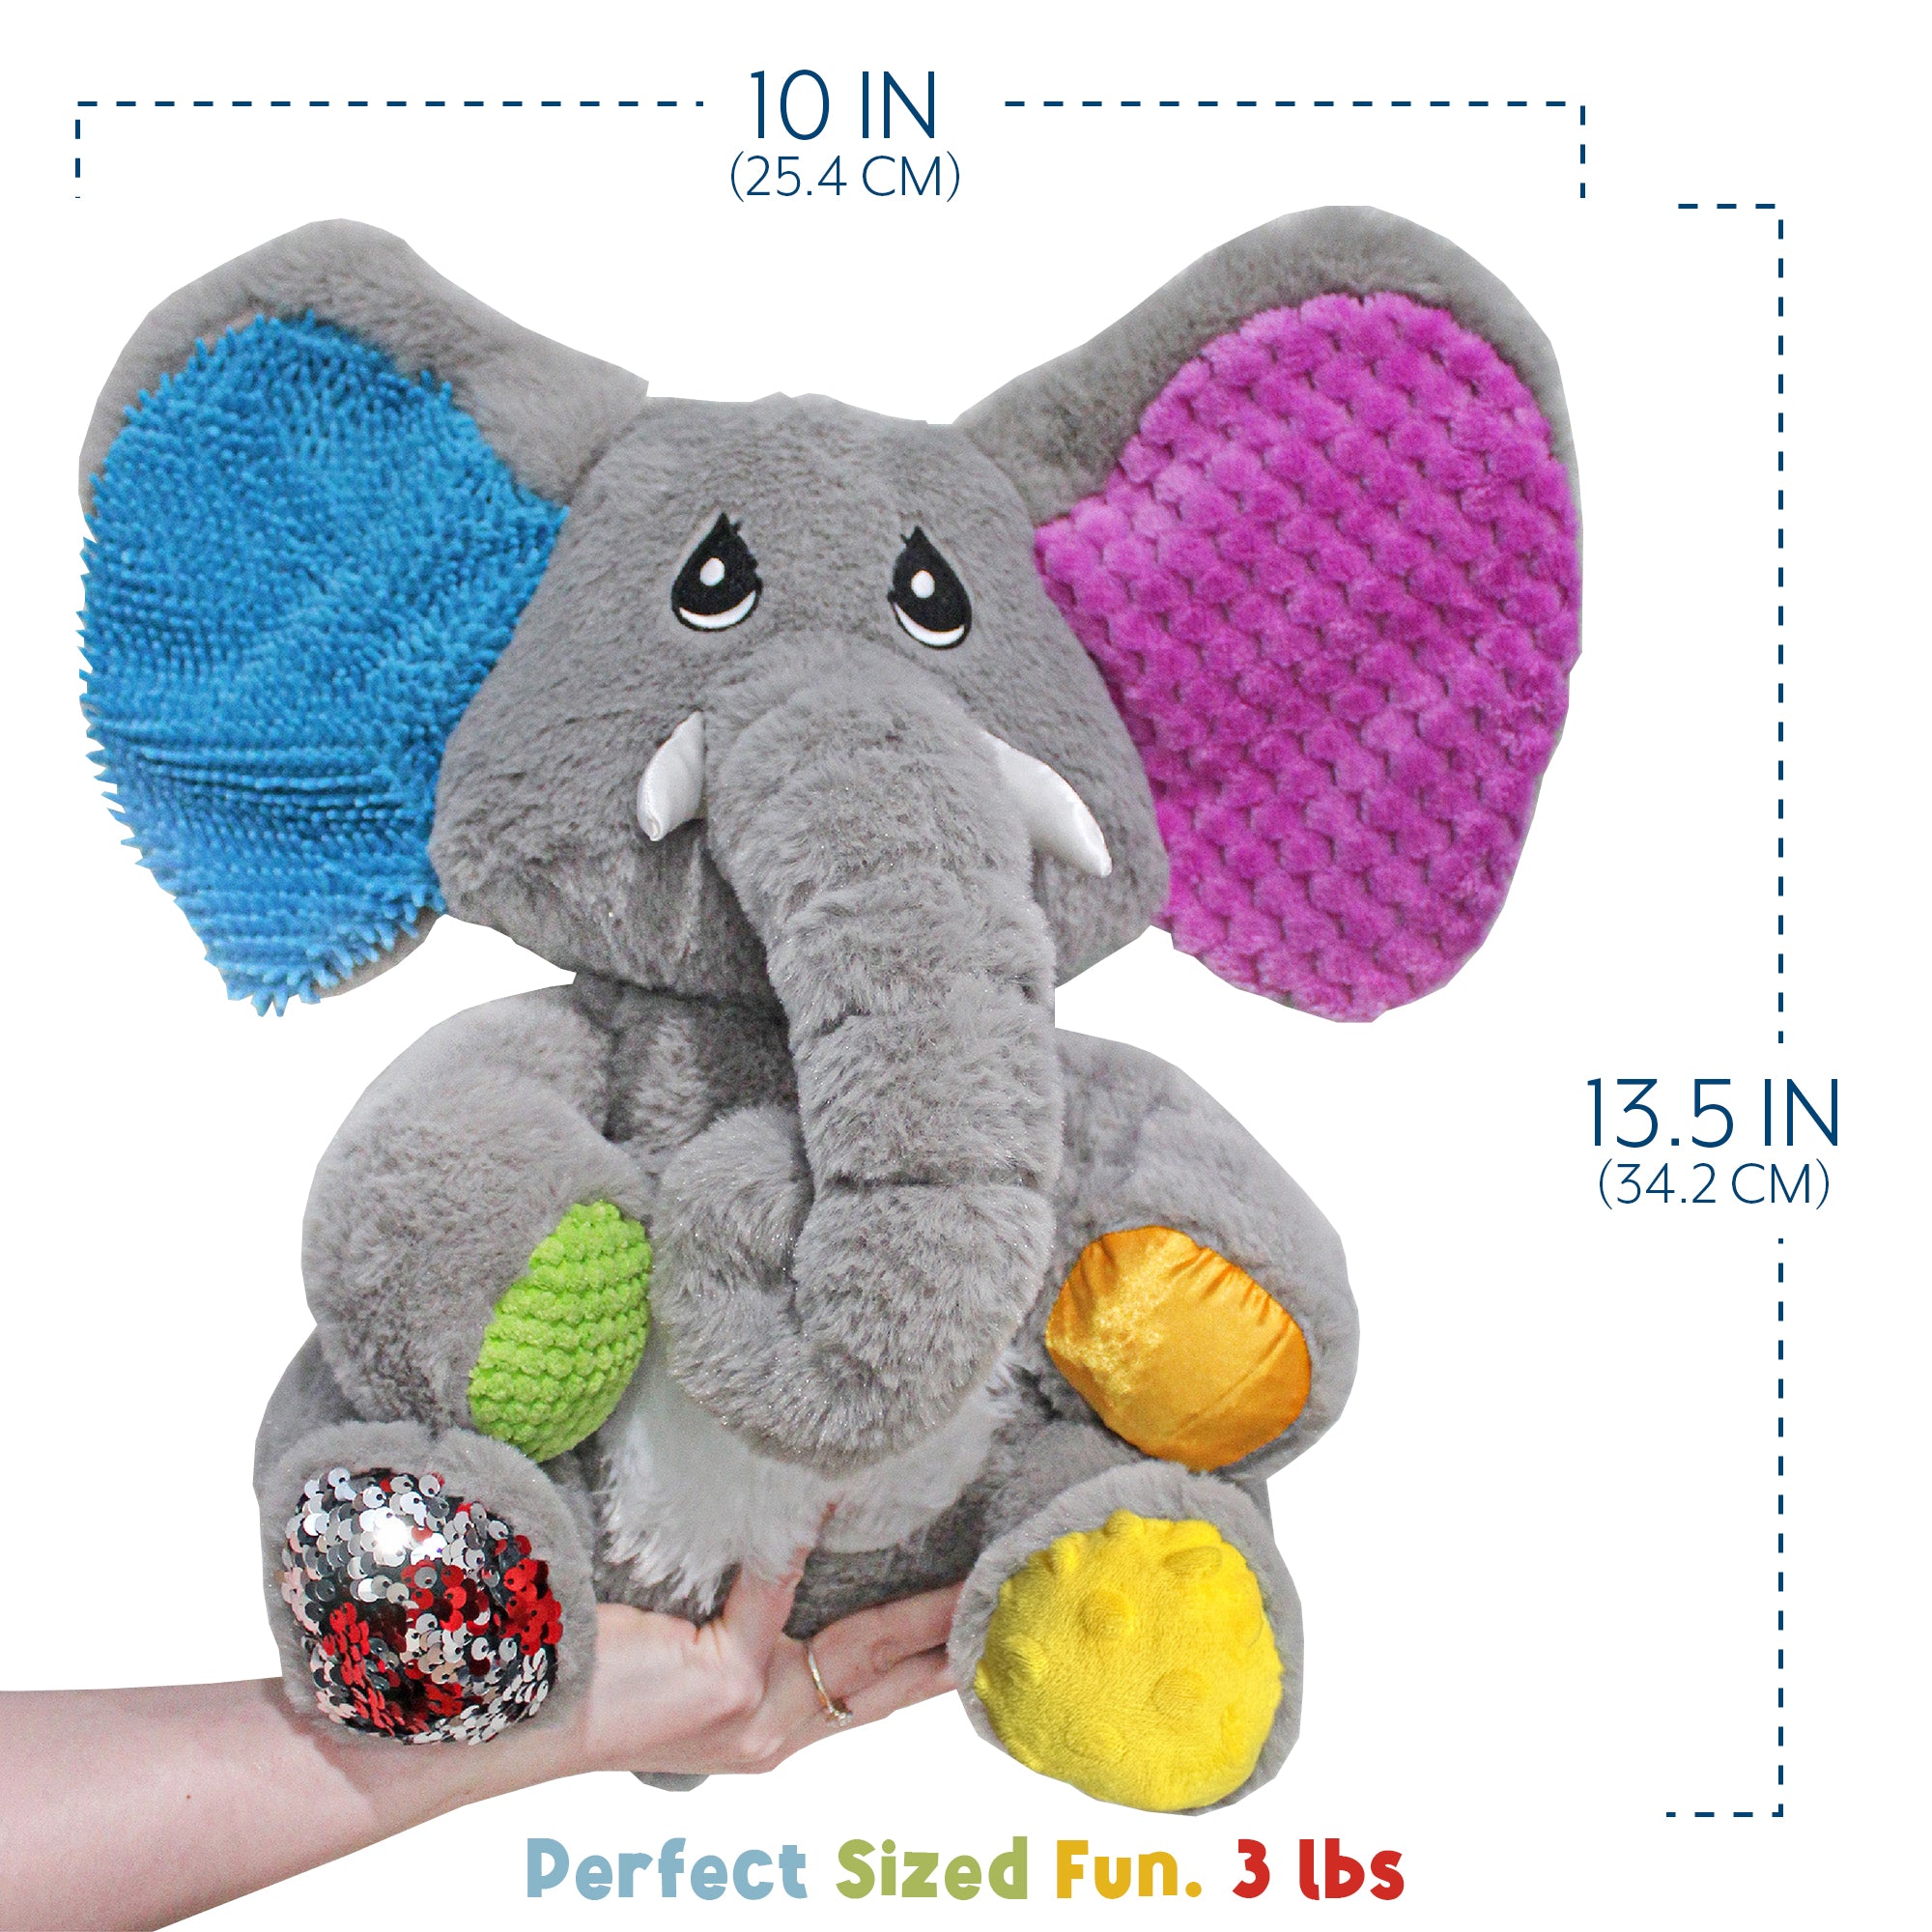 ELLIE the Weighted Sensory Calming Elephant